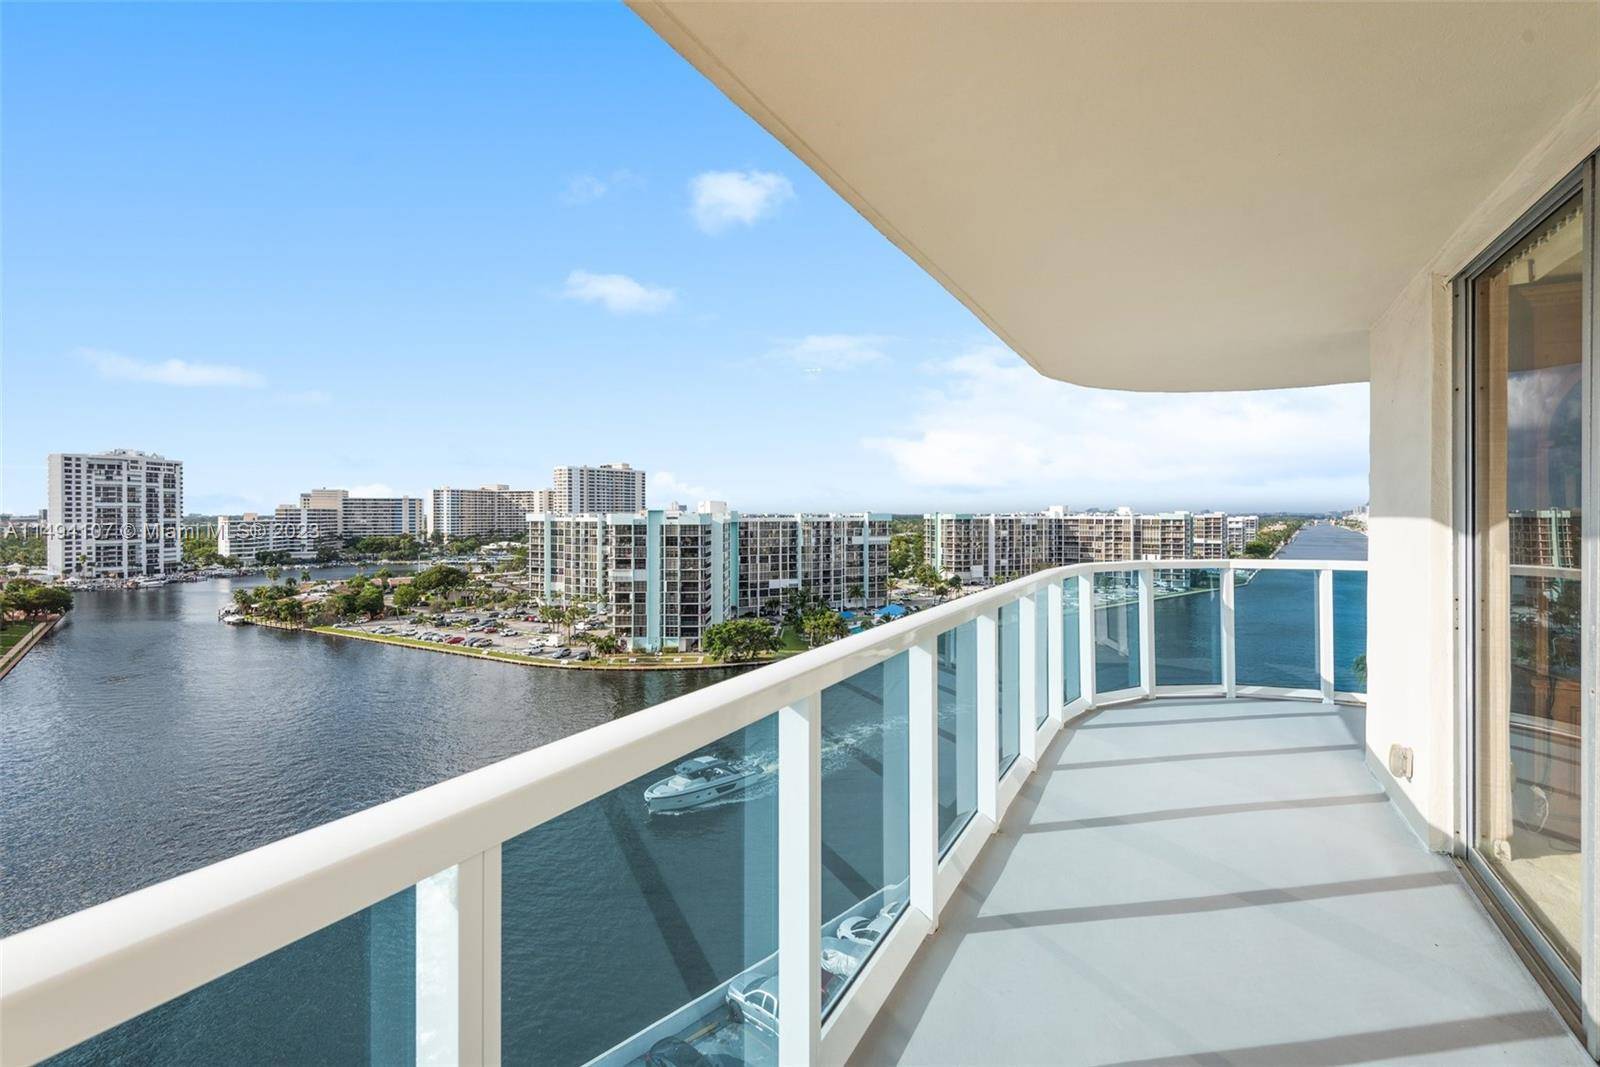 Rarely available, desirable, 1553sf, corner 2BR 2BA unit with the best 180 degree intracoastal views in the Hallmark Condo.